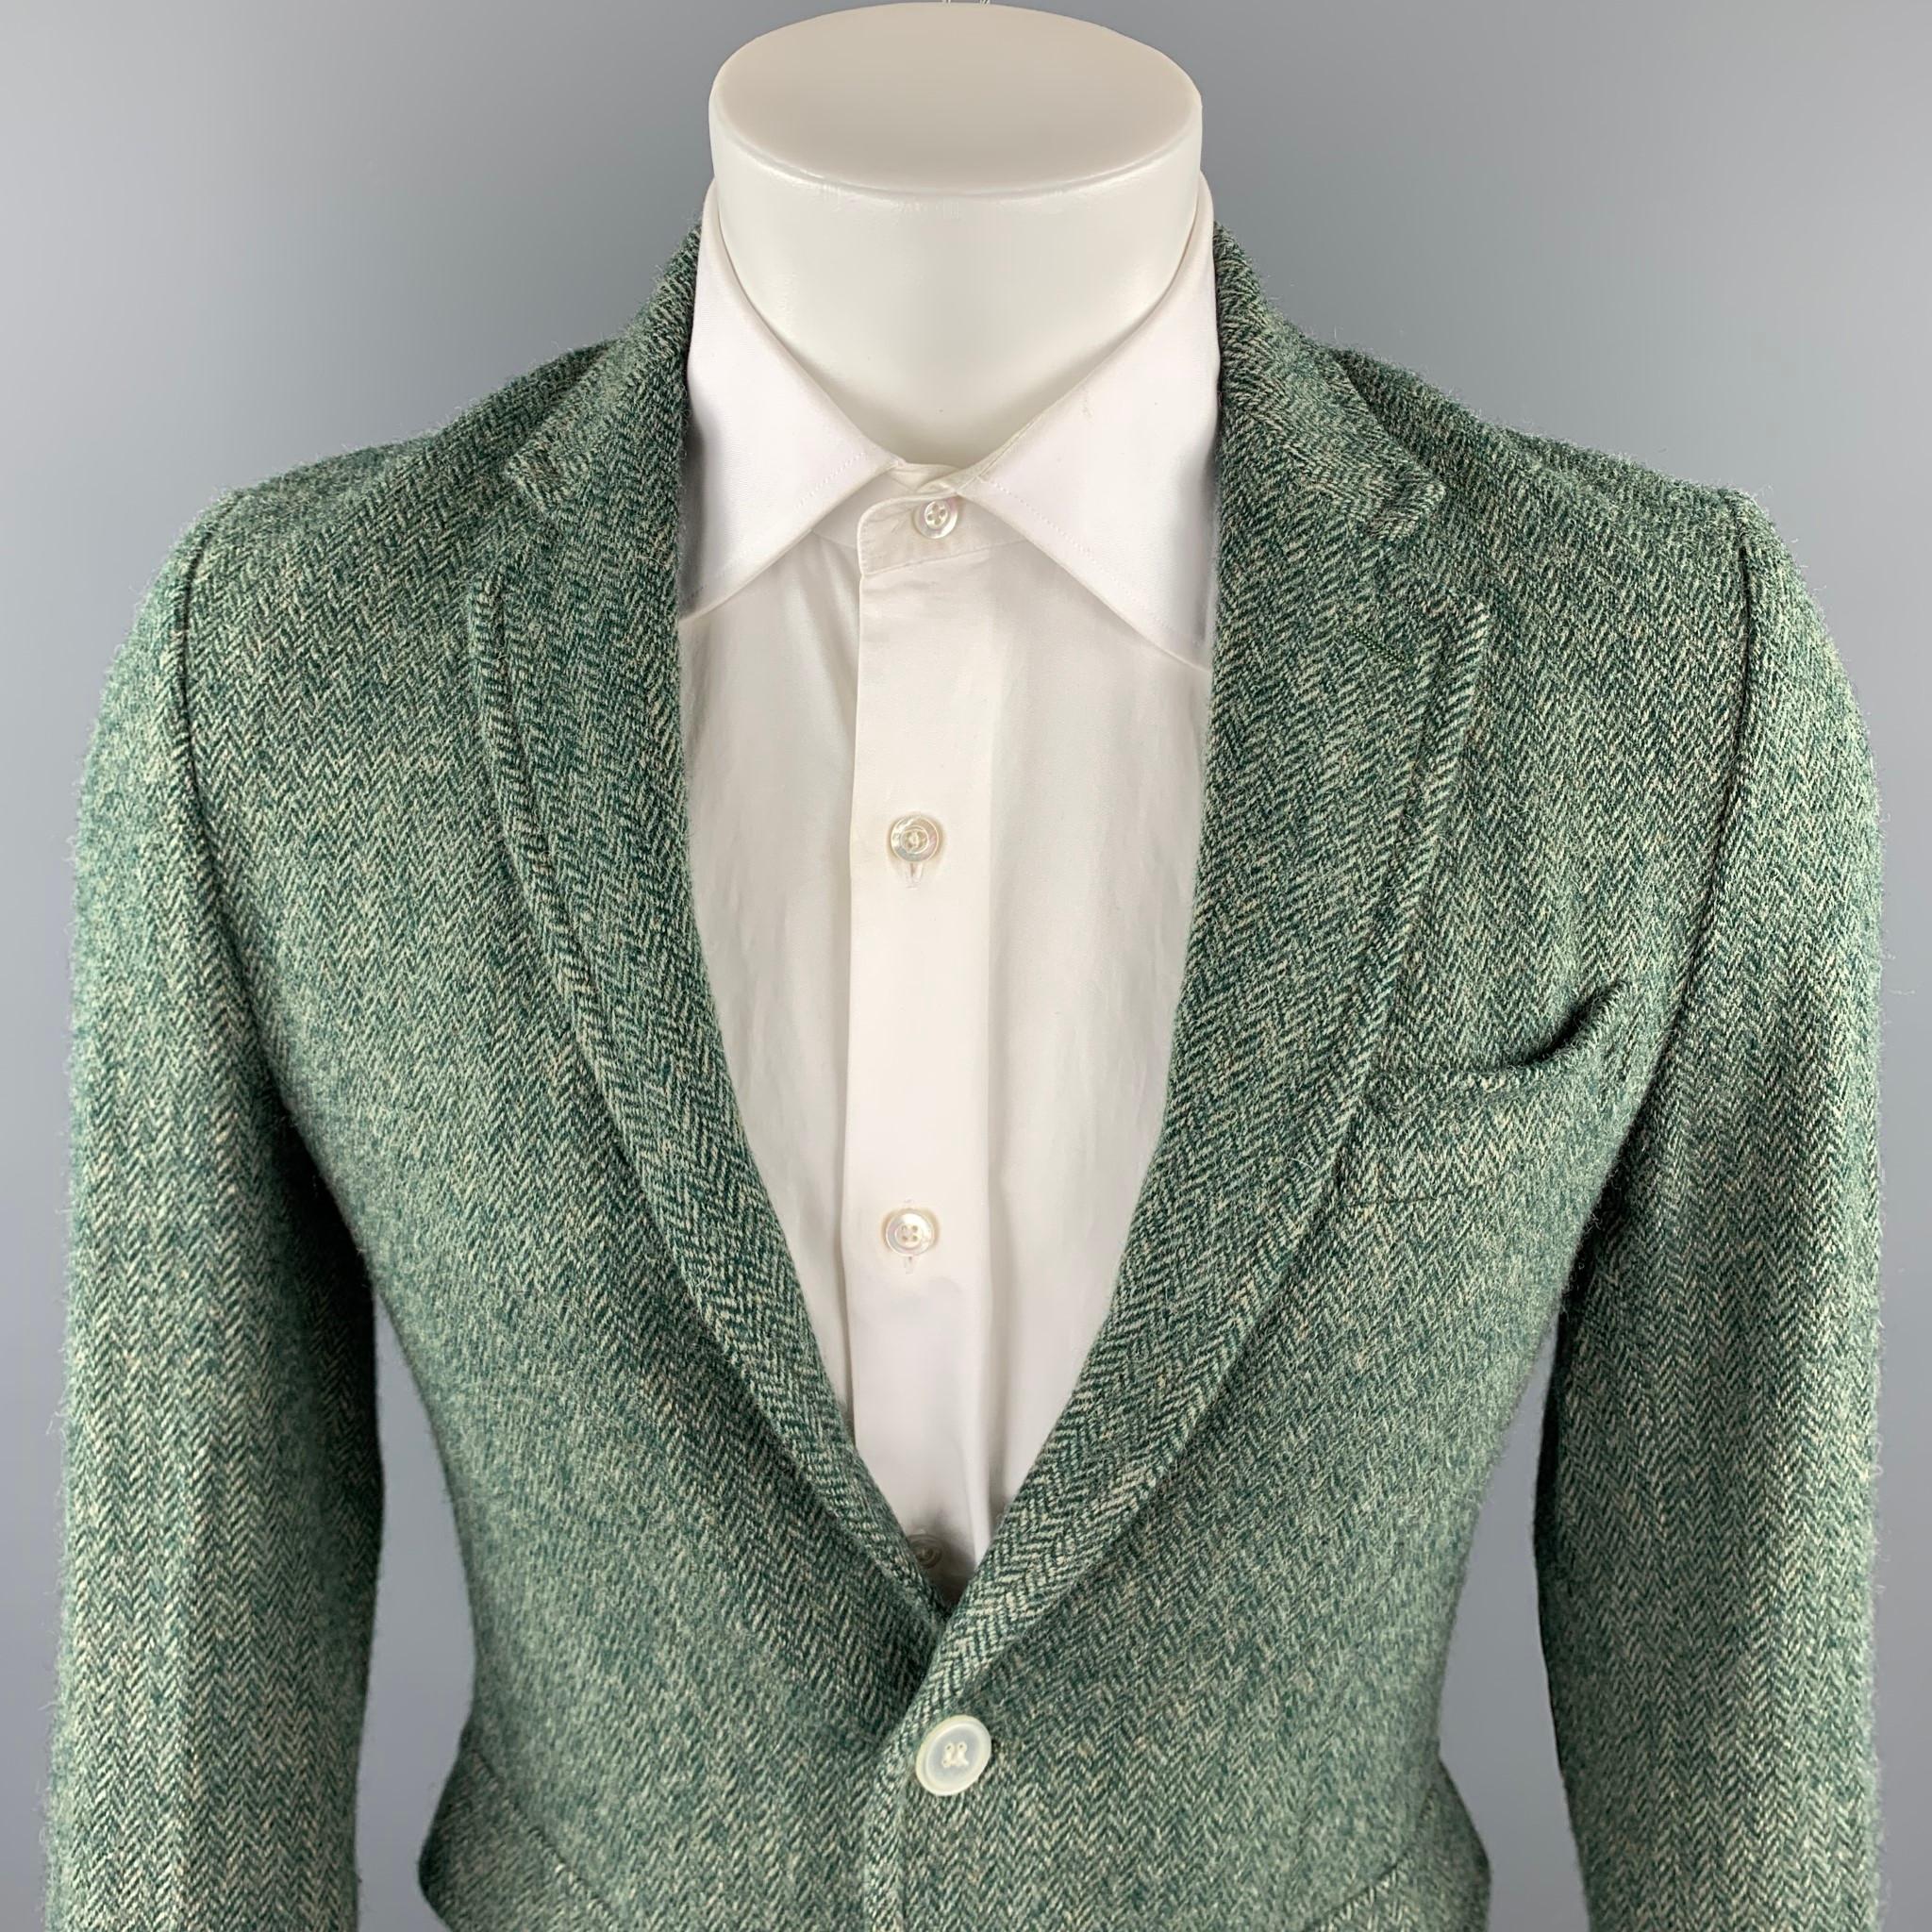 BAND OF OUTSIDERS sport coat comes in a green herringbone wool featuring a notch lapel, elbow patches, flap pockets, and a two button closure. Made in Italy.

Very Good Pre-Owned Condition.
Marked: 2

Measurements:

Shoulder: 16.5 in. 
Chest: 38 in.